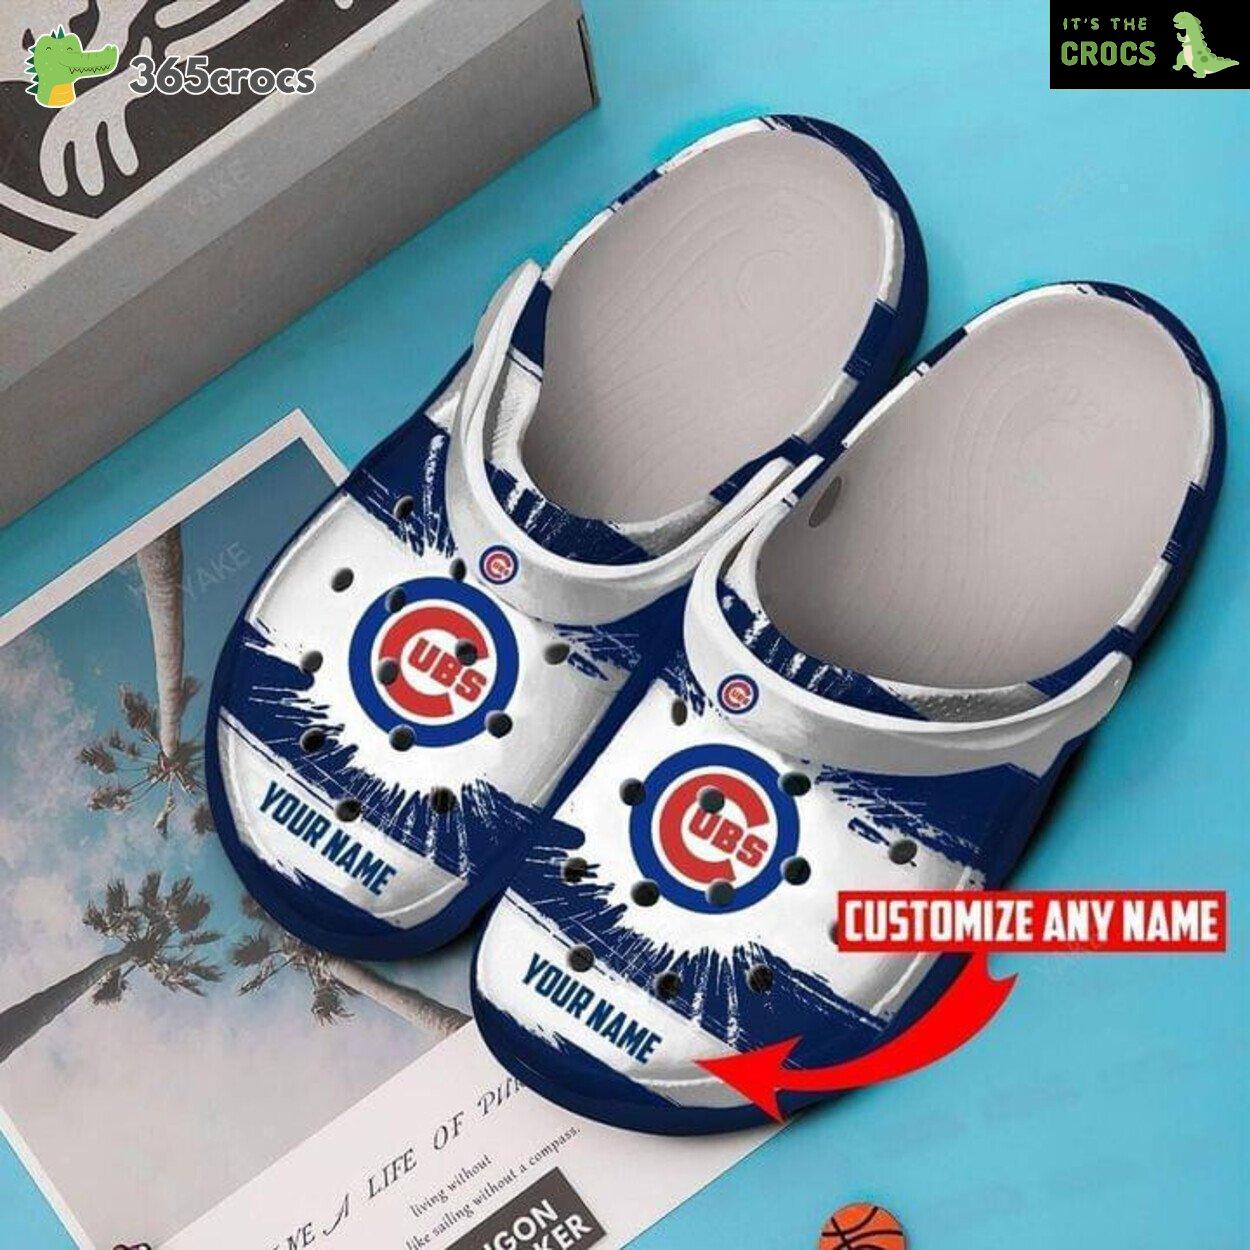 Chicago Cubs Baseball Spirit Celebrated on Croc Shoes